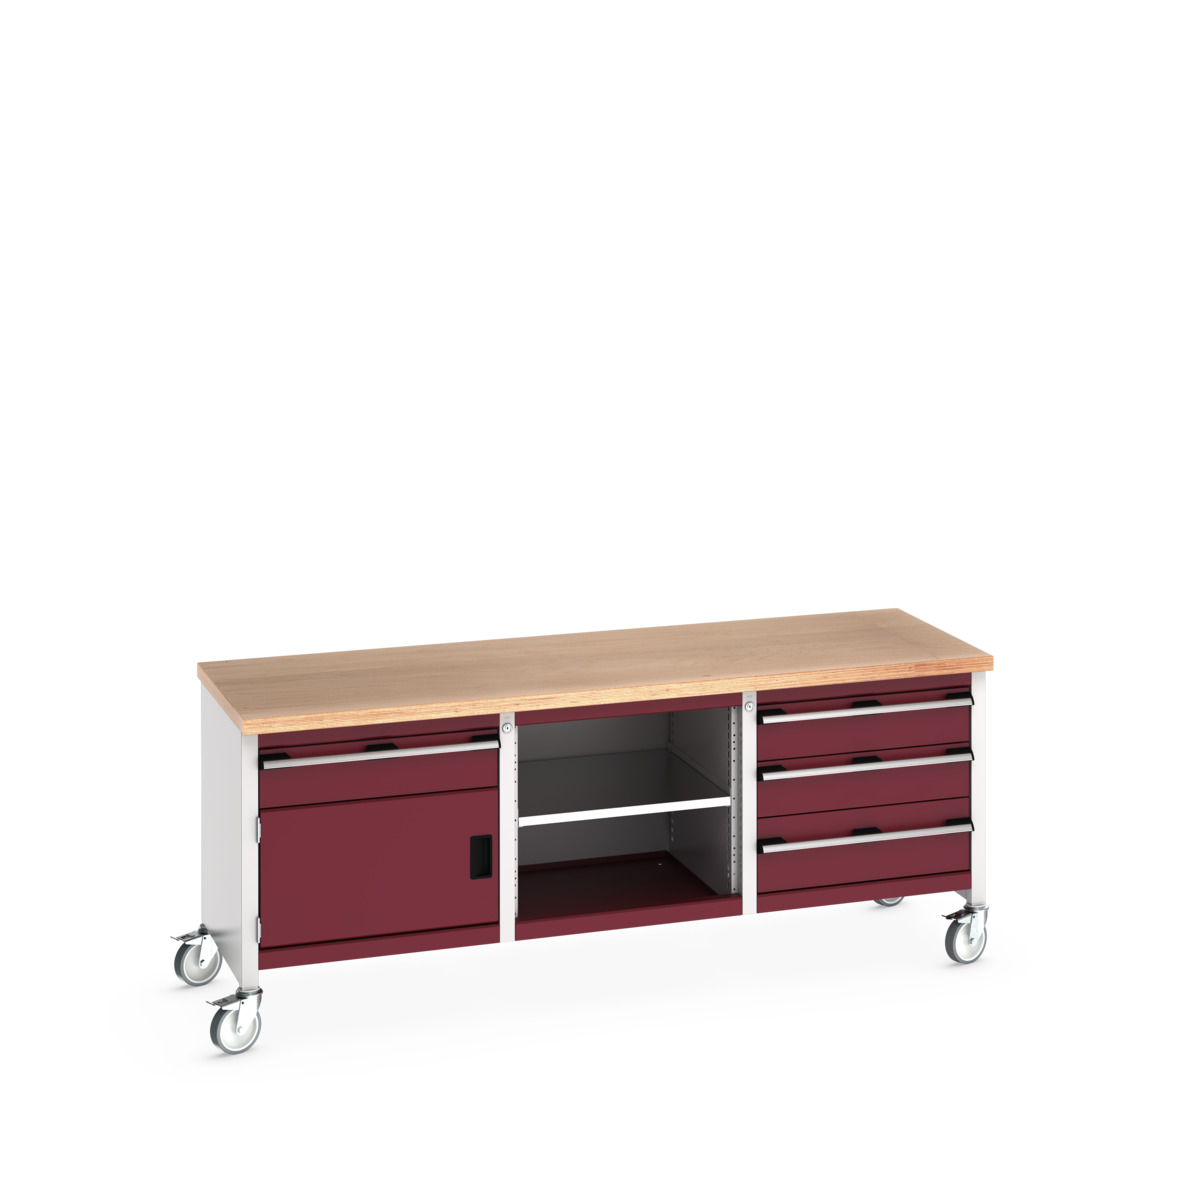 41002127.24V - cubio mobile storage bench (mpx)